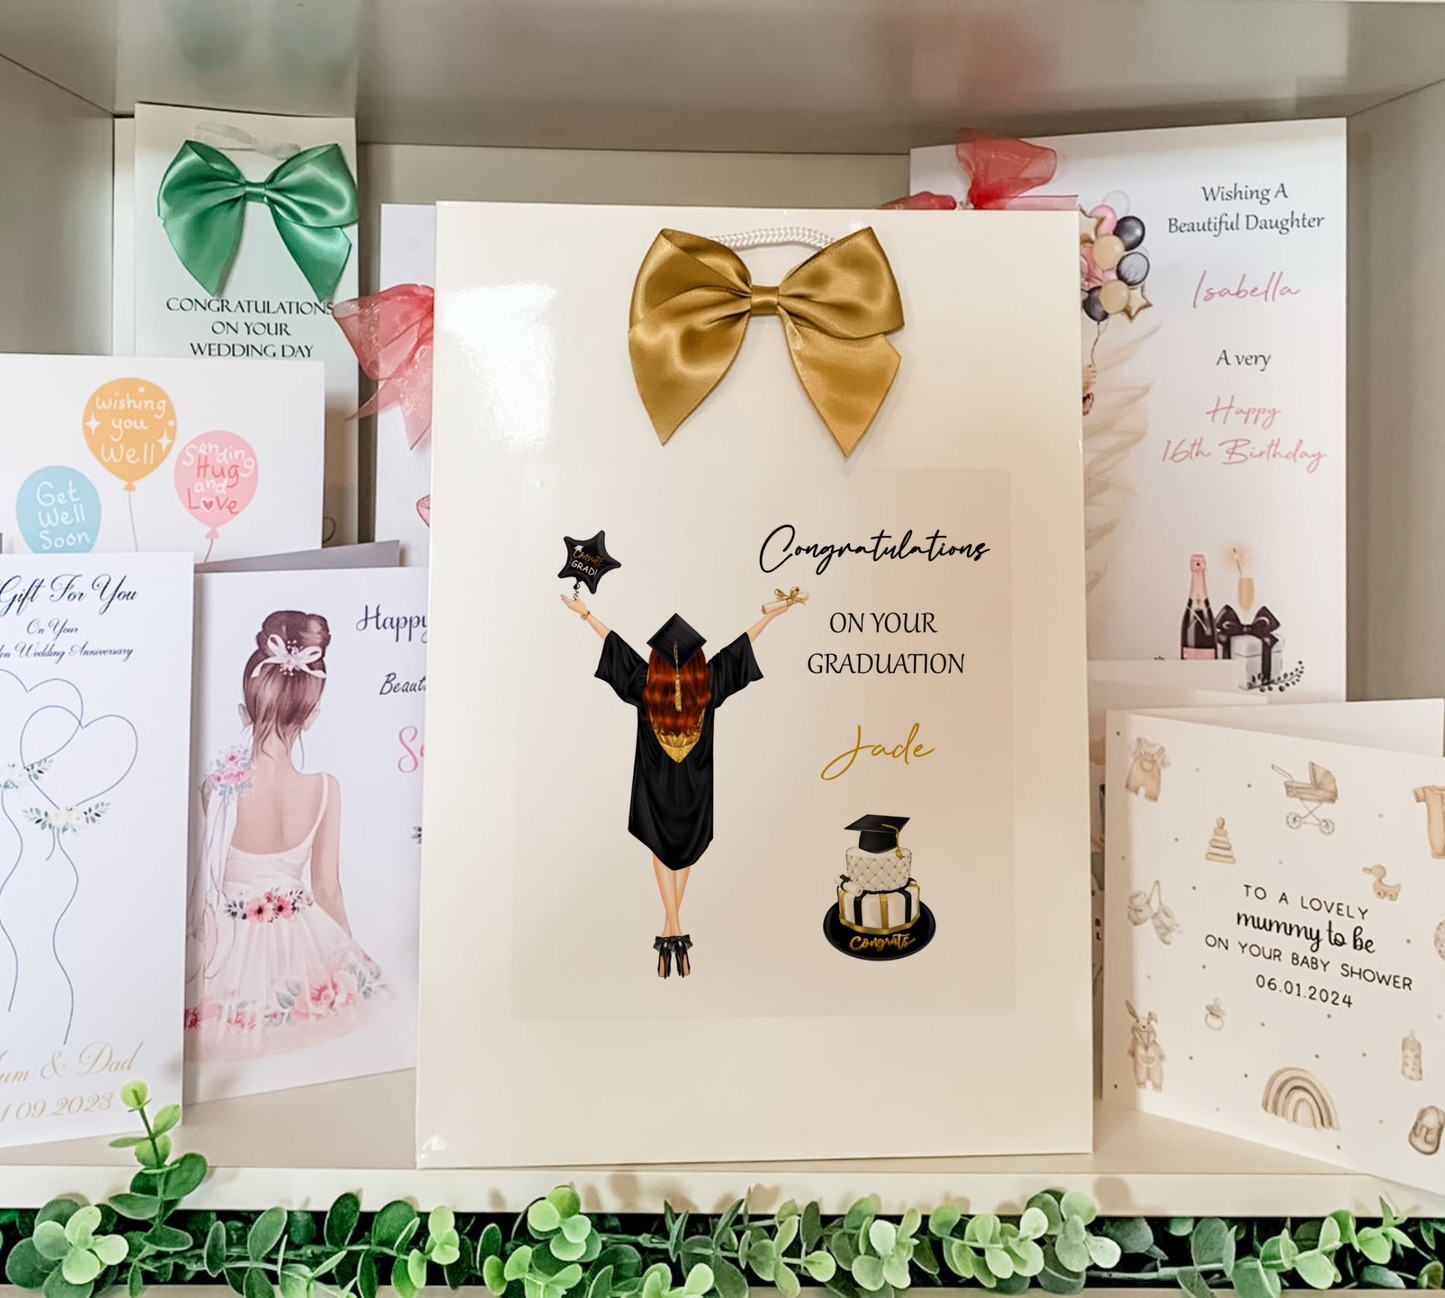 a display of congratulations cards and greeting cards